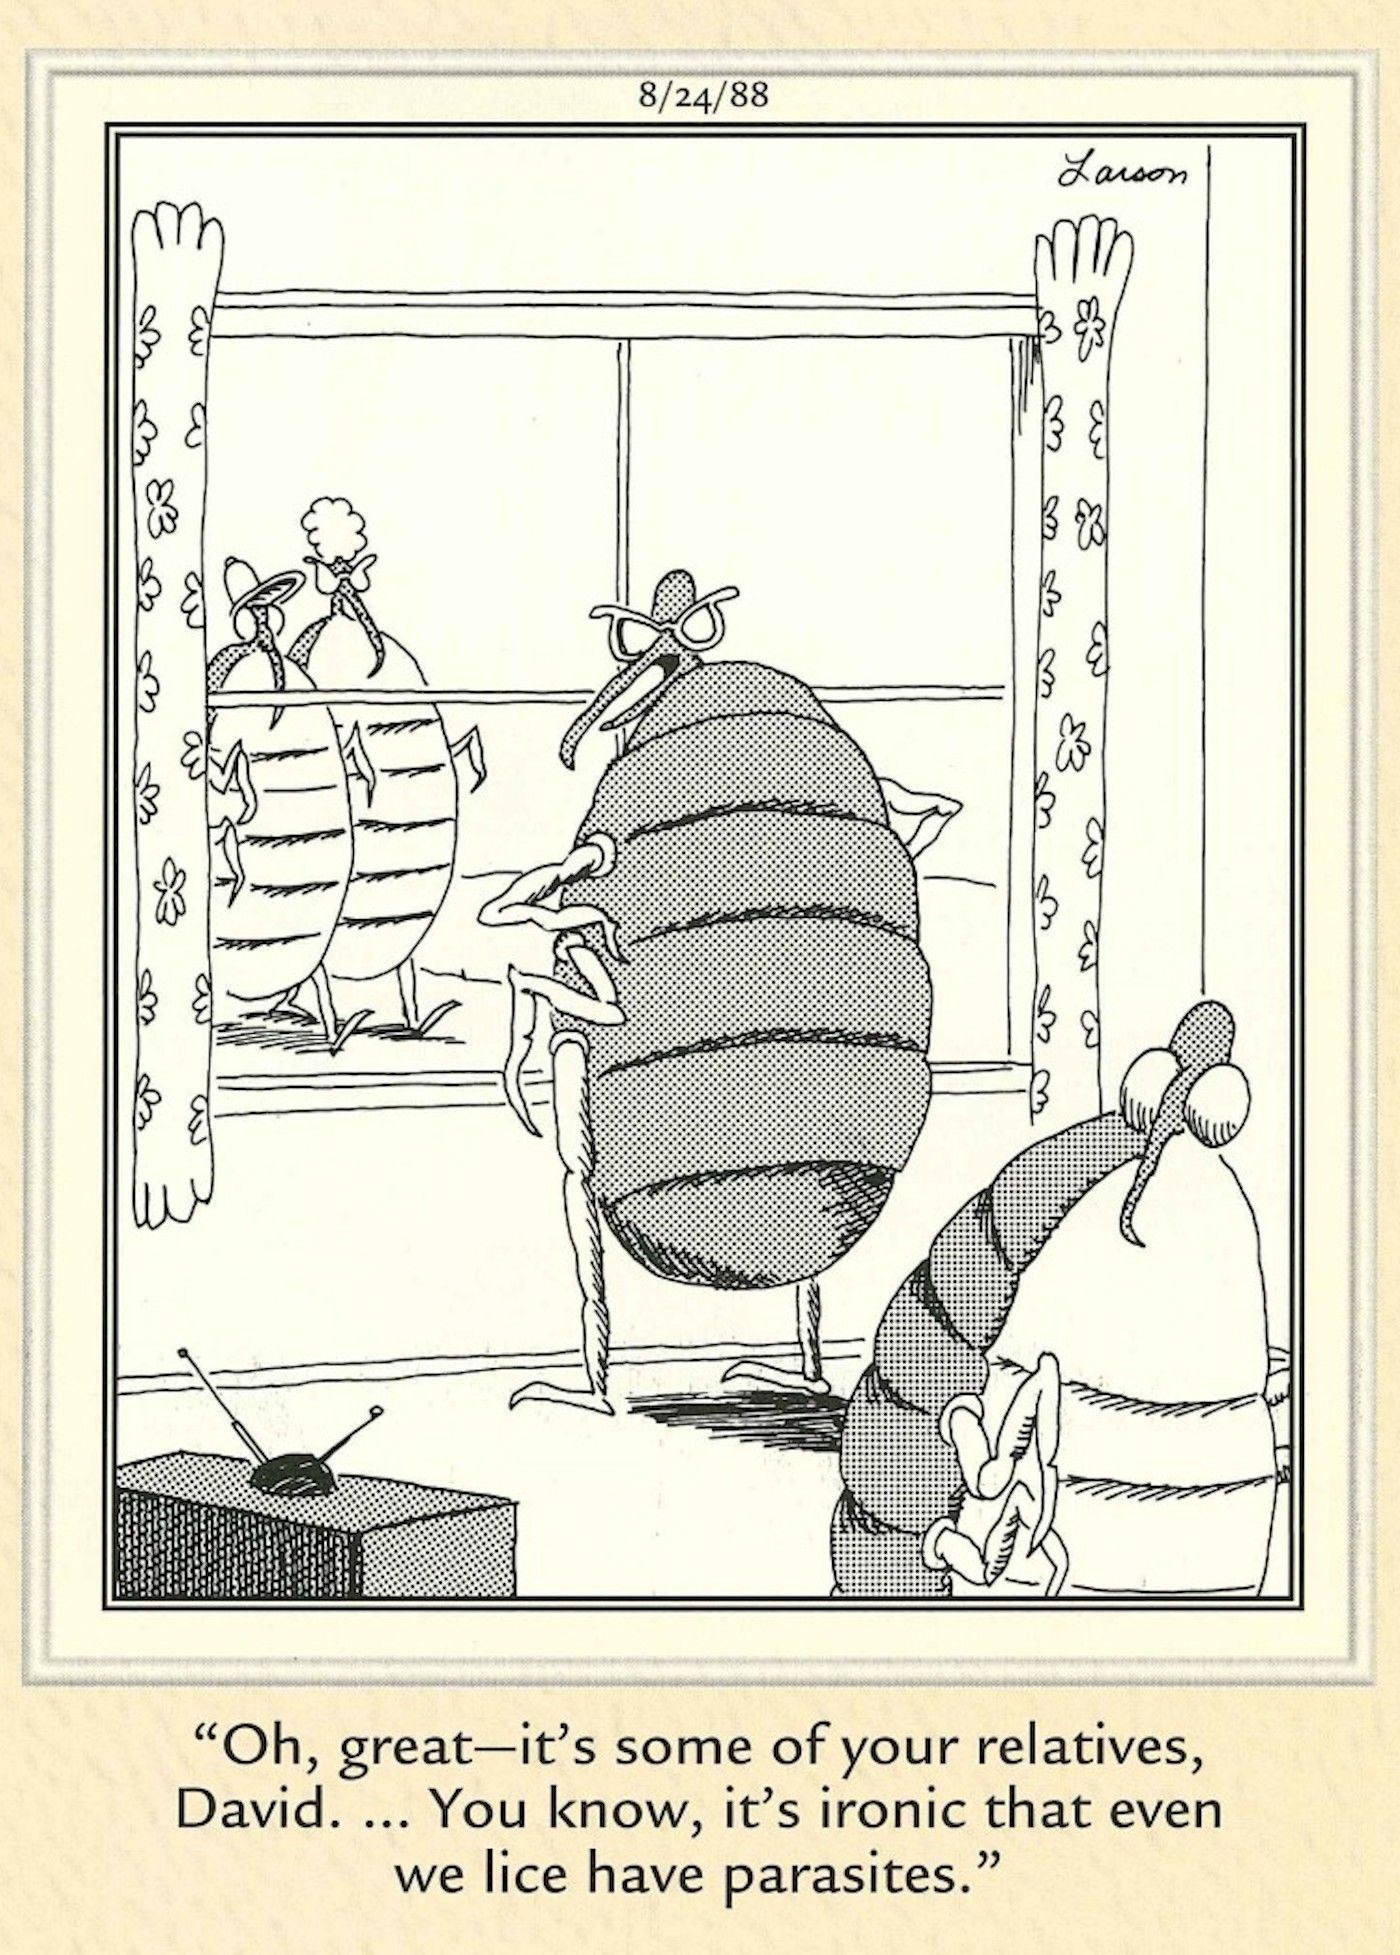 The Far Side lice have parasites